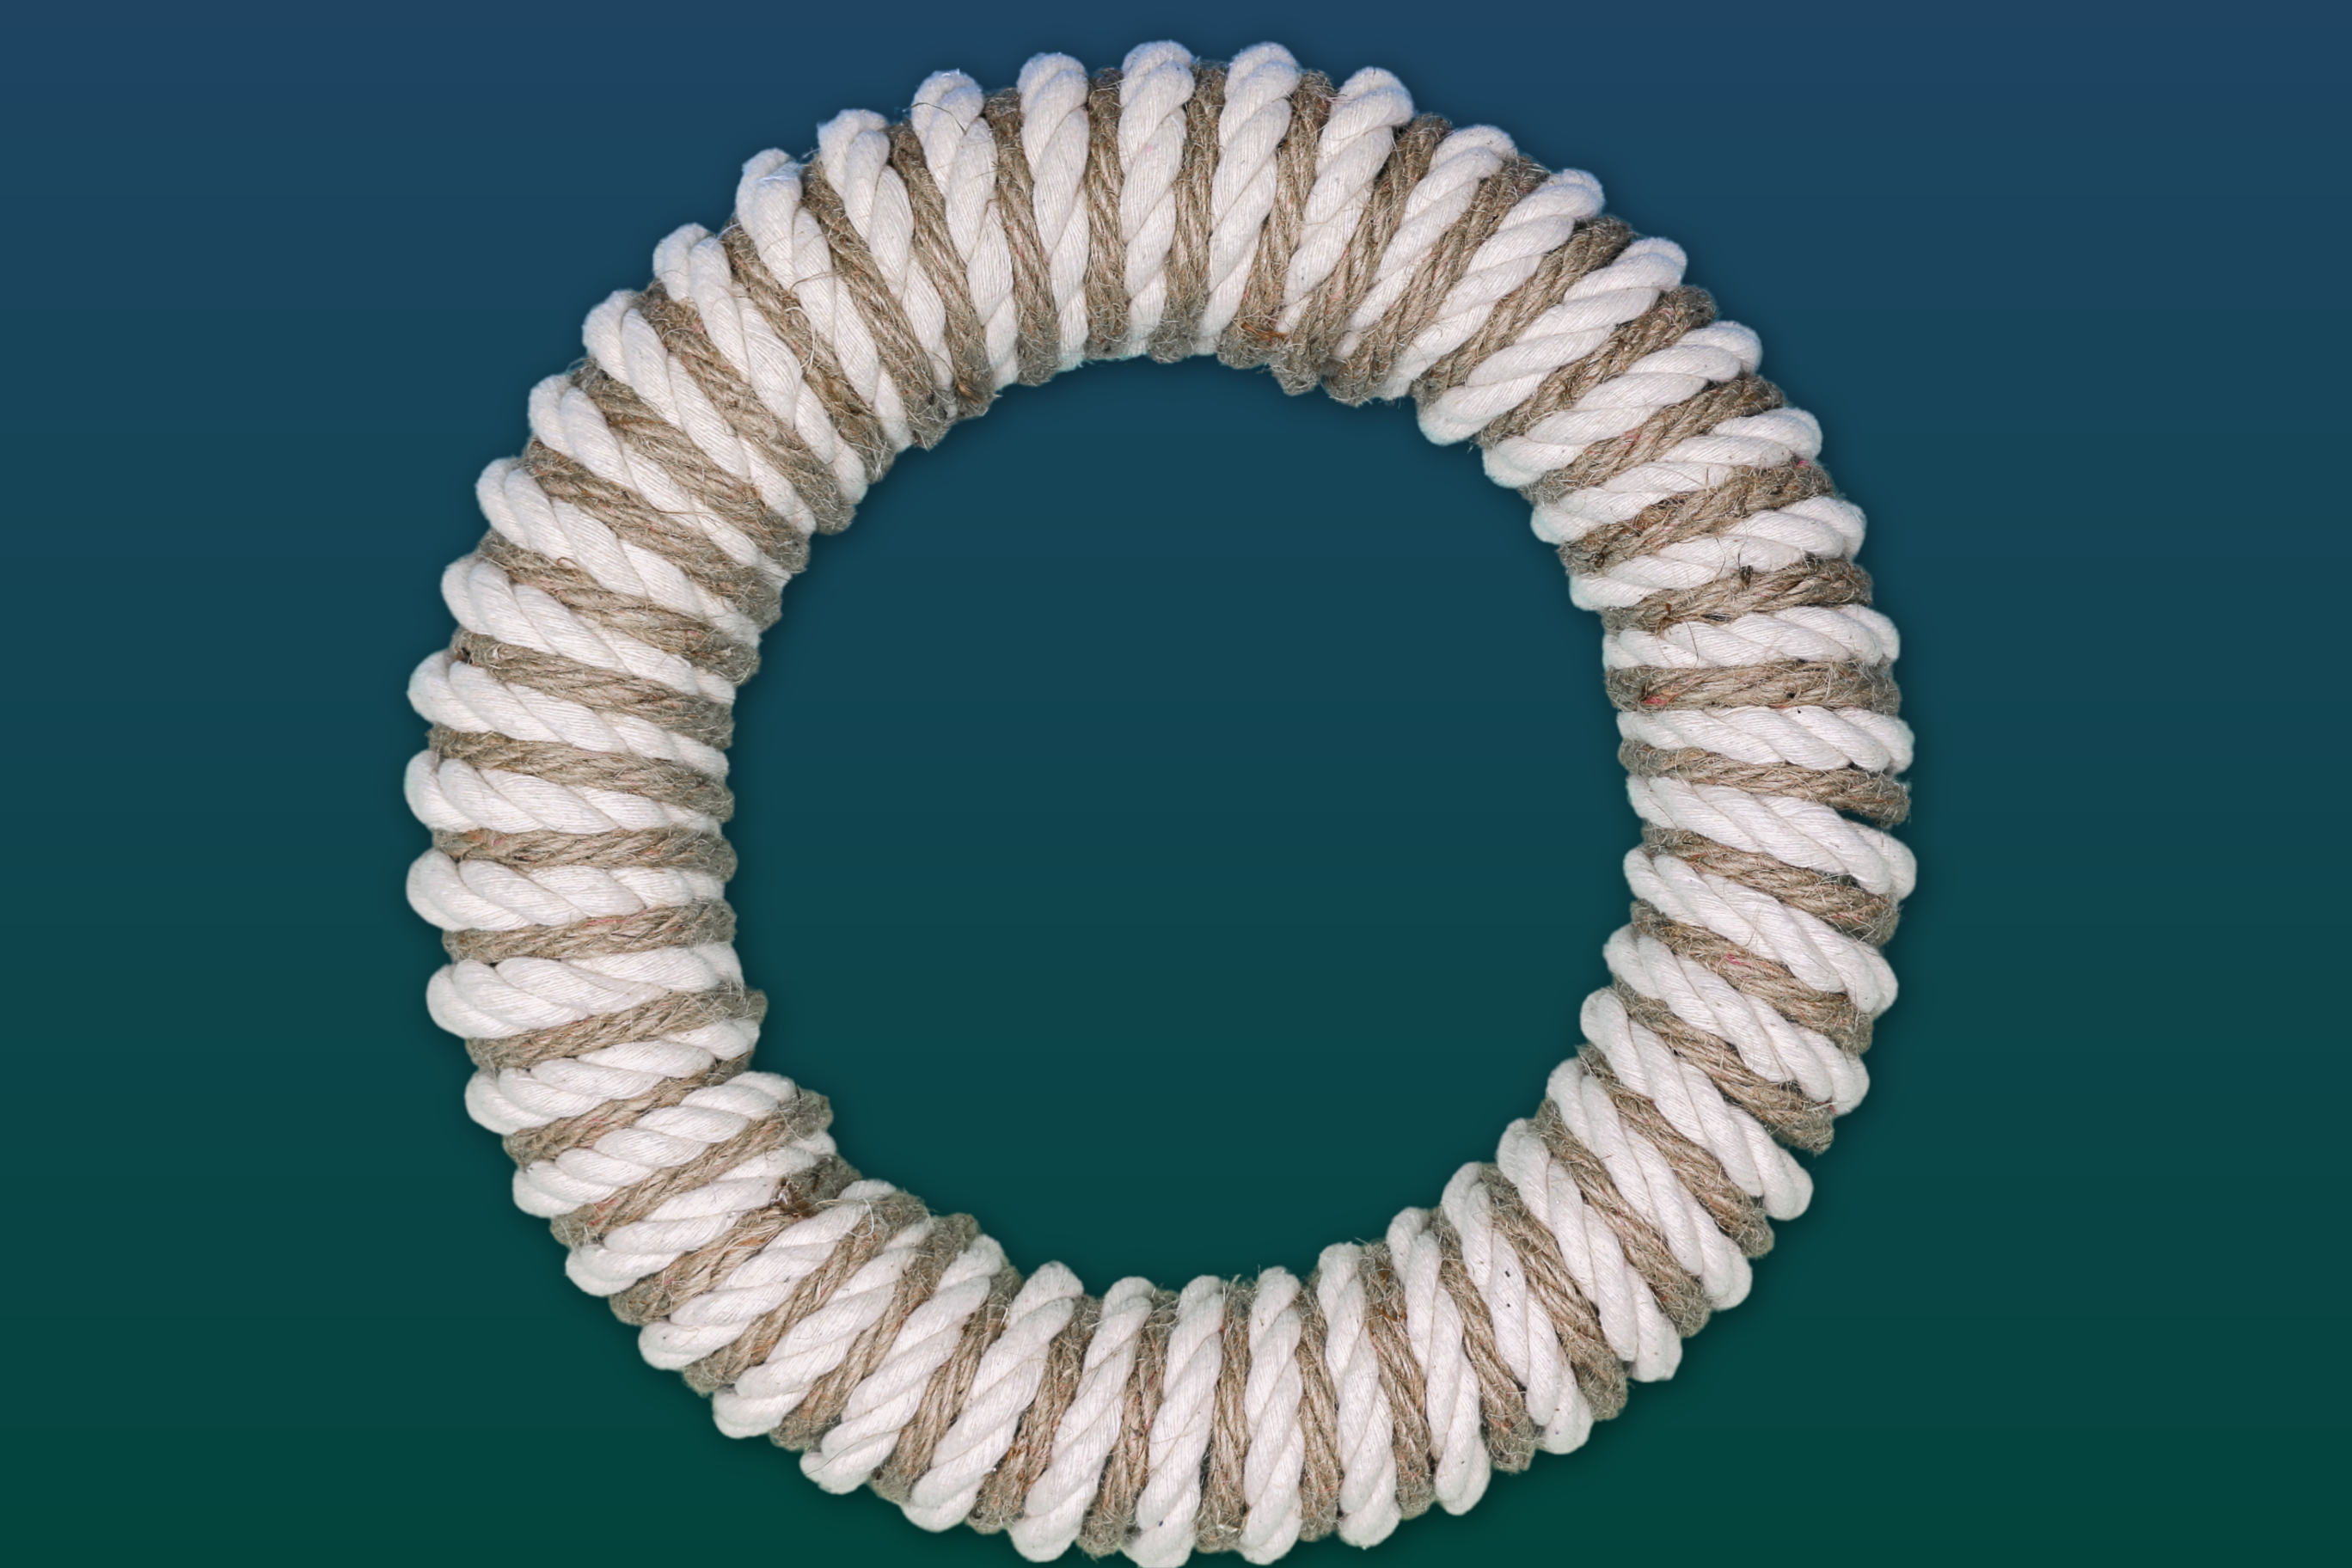 wreath wrapped with white nautical rope and brown sisal rope